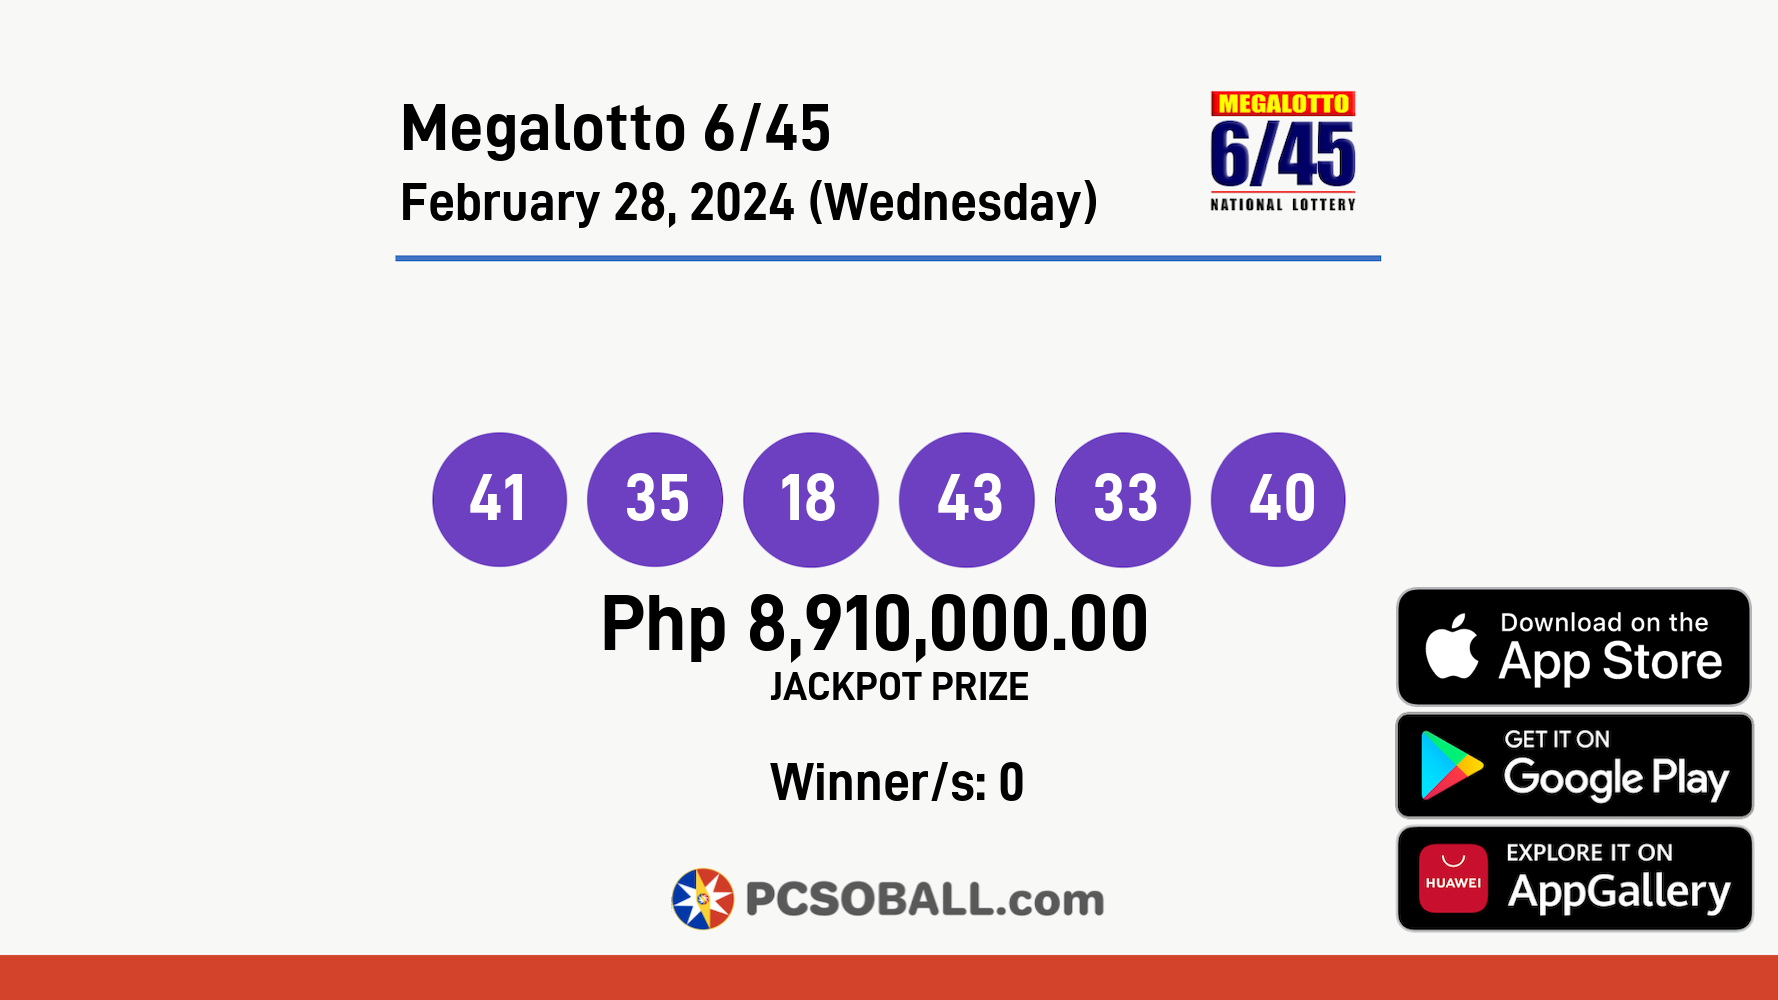 Megalotto 6/45 February 28, 2024 (Wednesday) Result